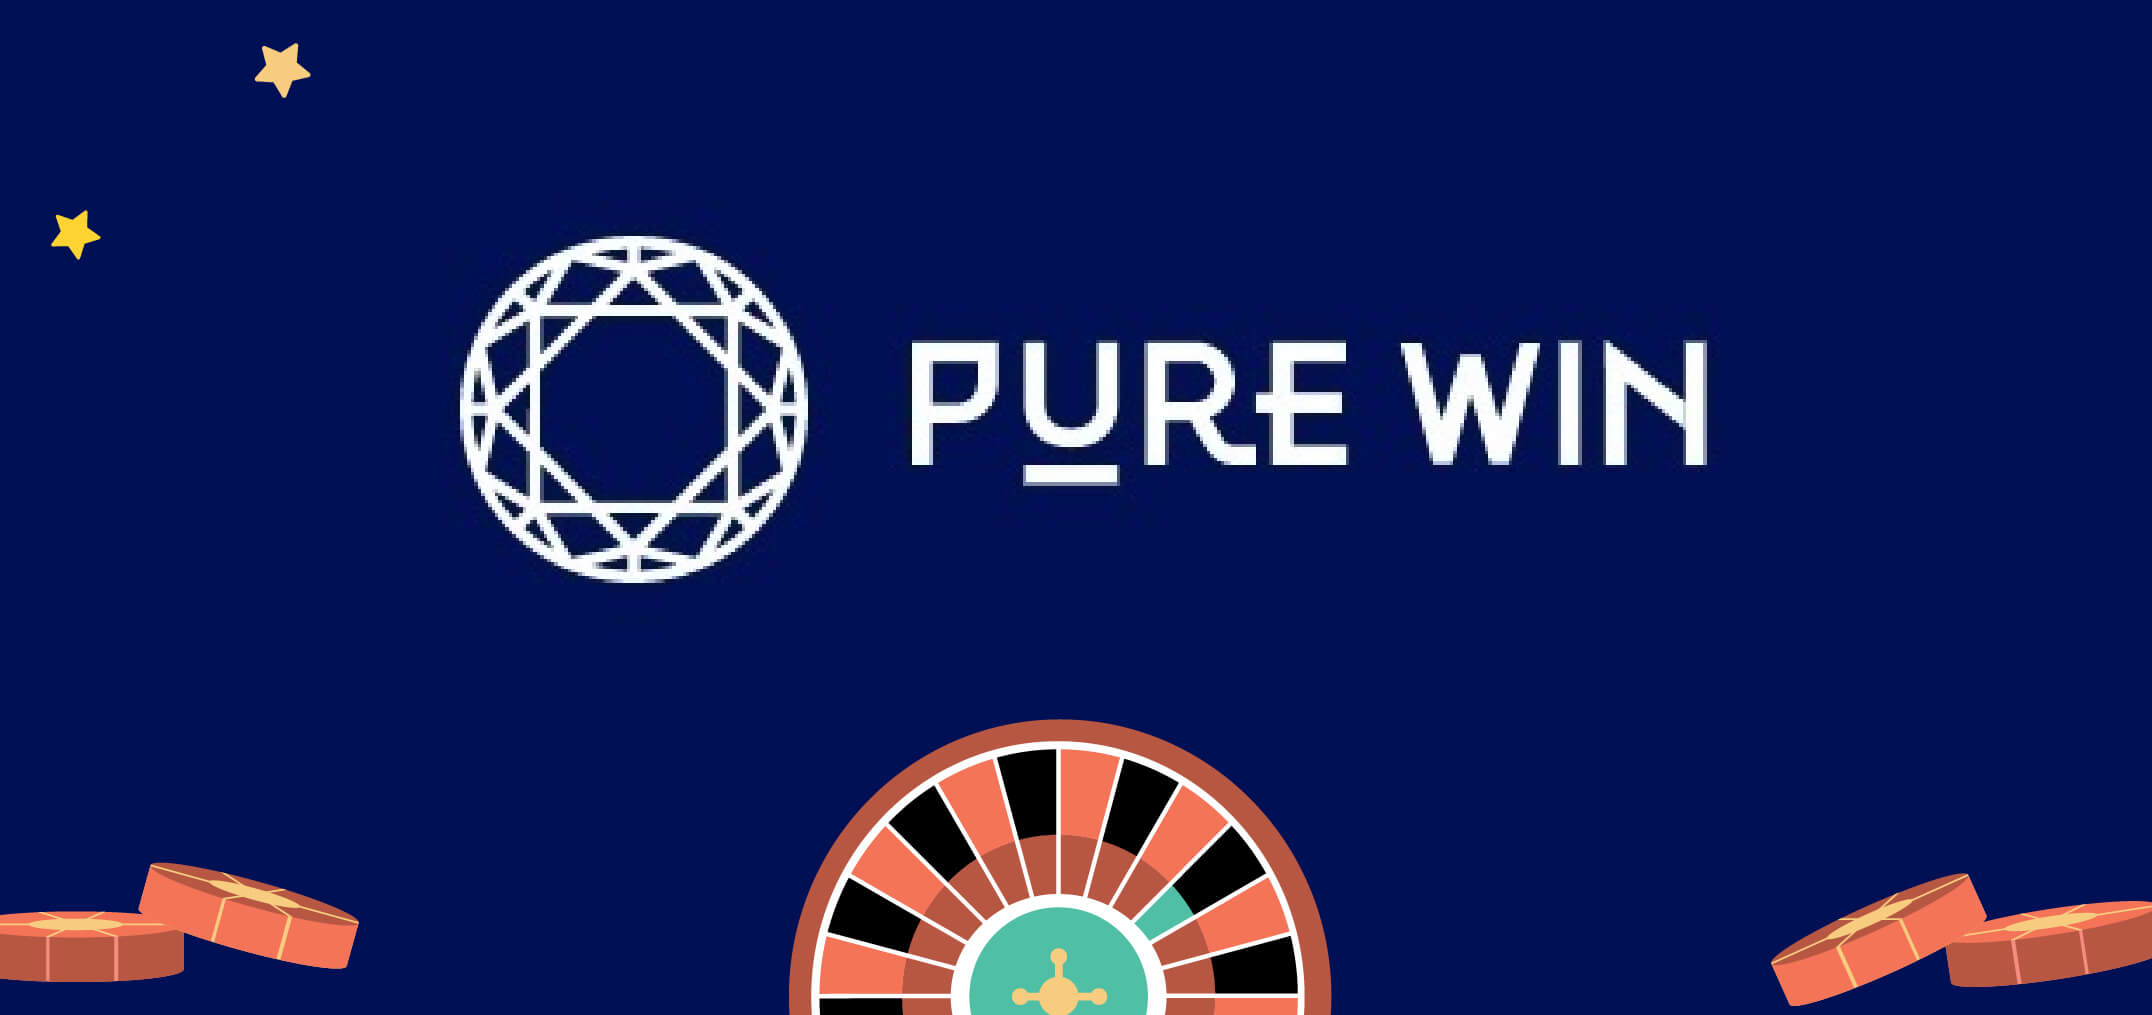 Key points about Purewin casino